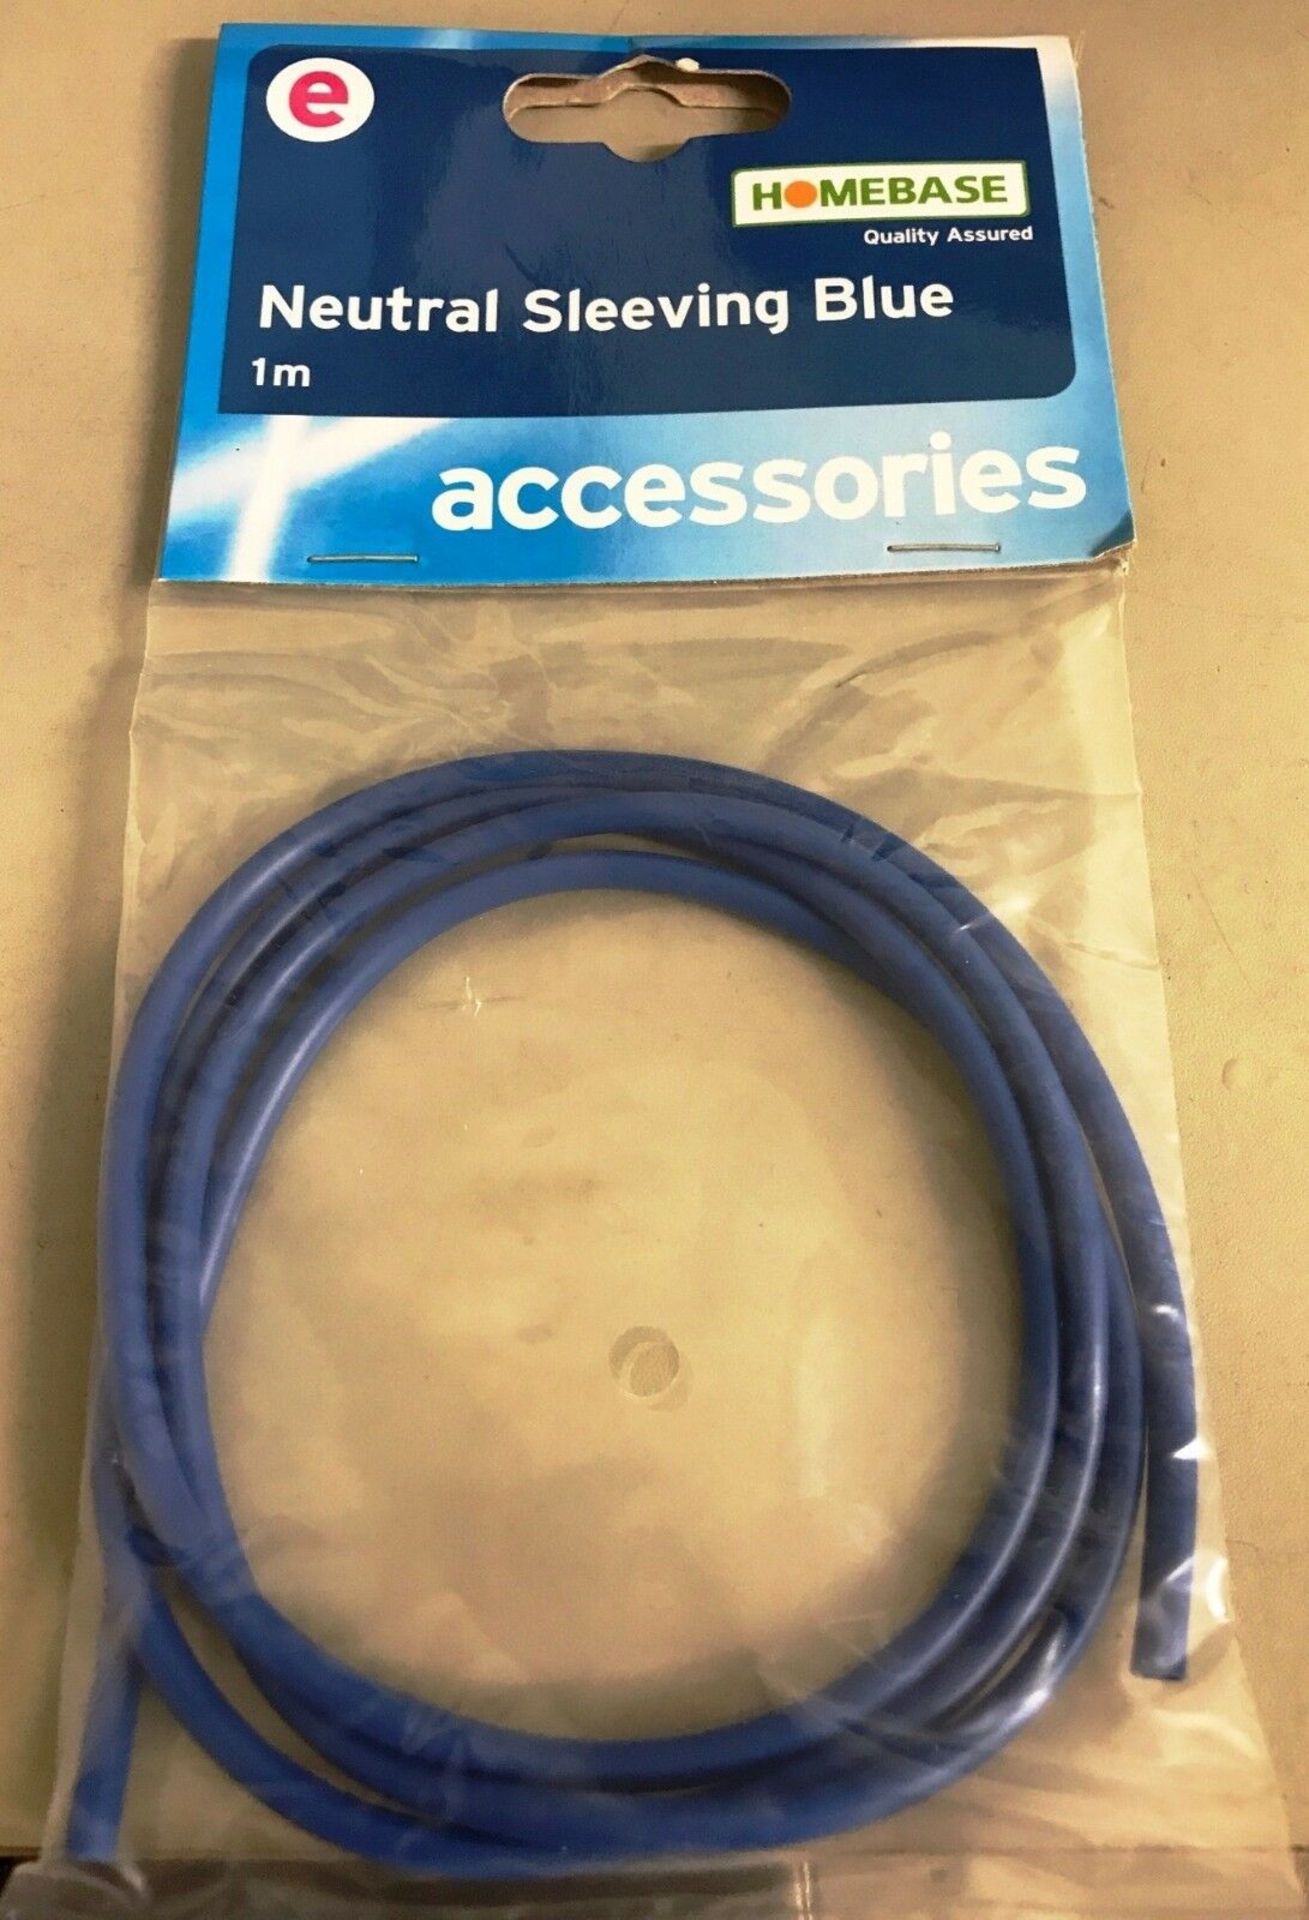 PACK OF 10 BLUE 1M NEUTRAL SLEEVING SCHNEIDER ELECTRIC